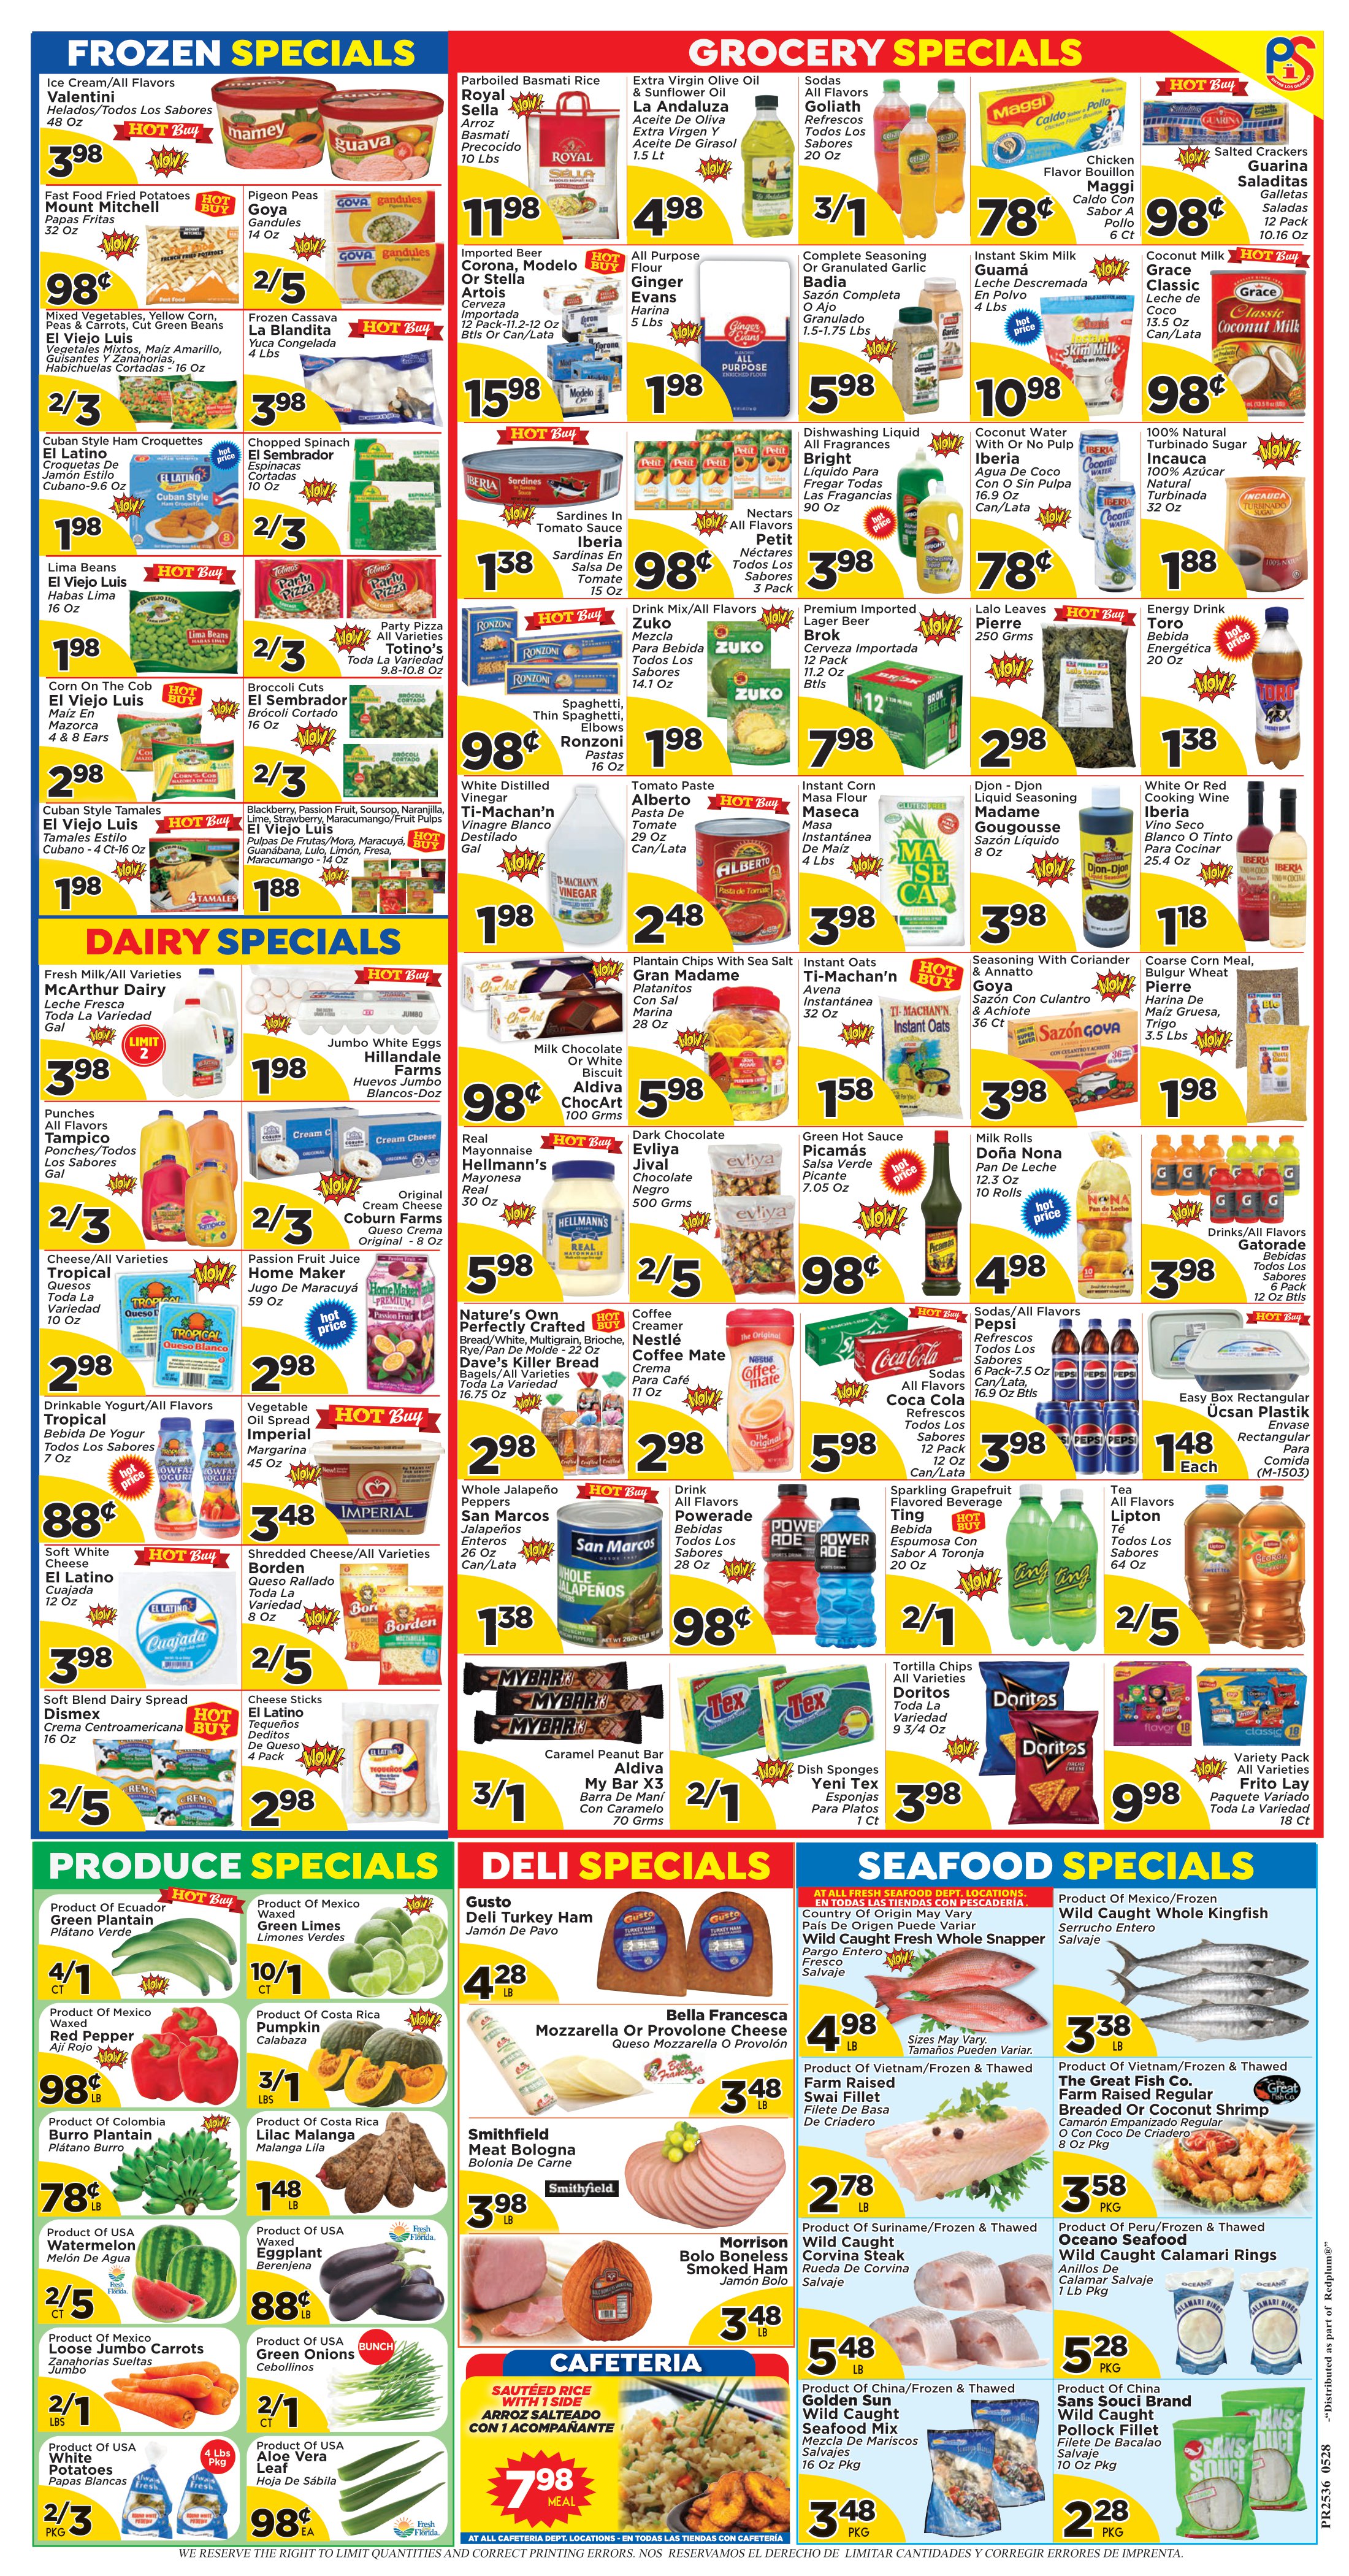 Presidente Supermarket - Weekly Promo for Stores 25, 36, 37, 40 and 43 Page 2